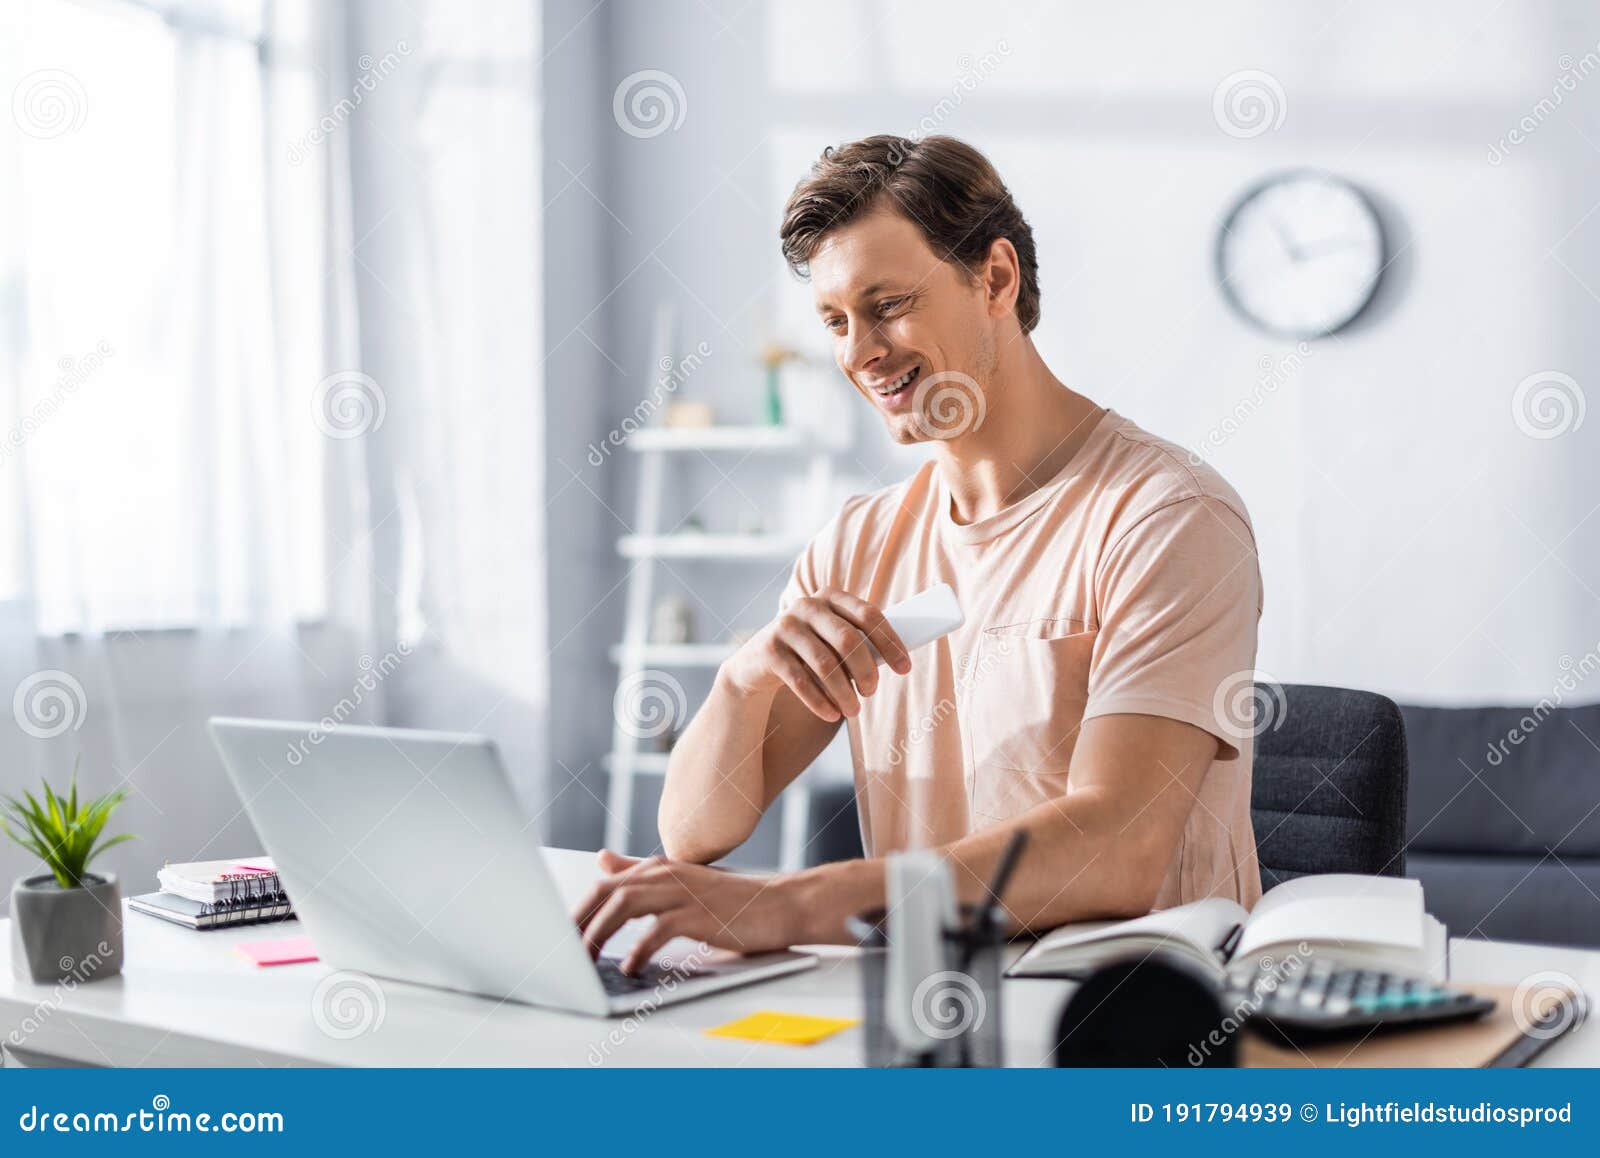 smiling teleworker looking at laptop and